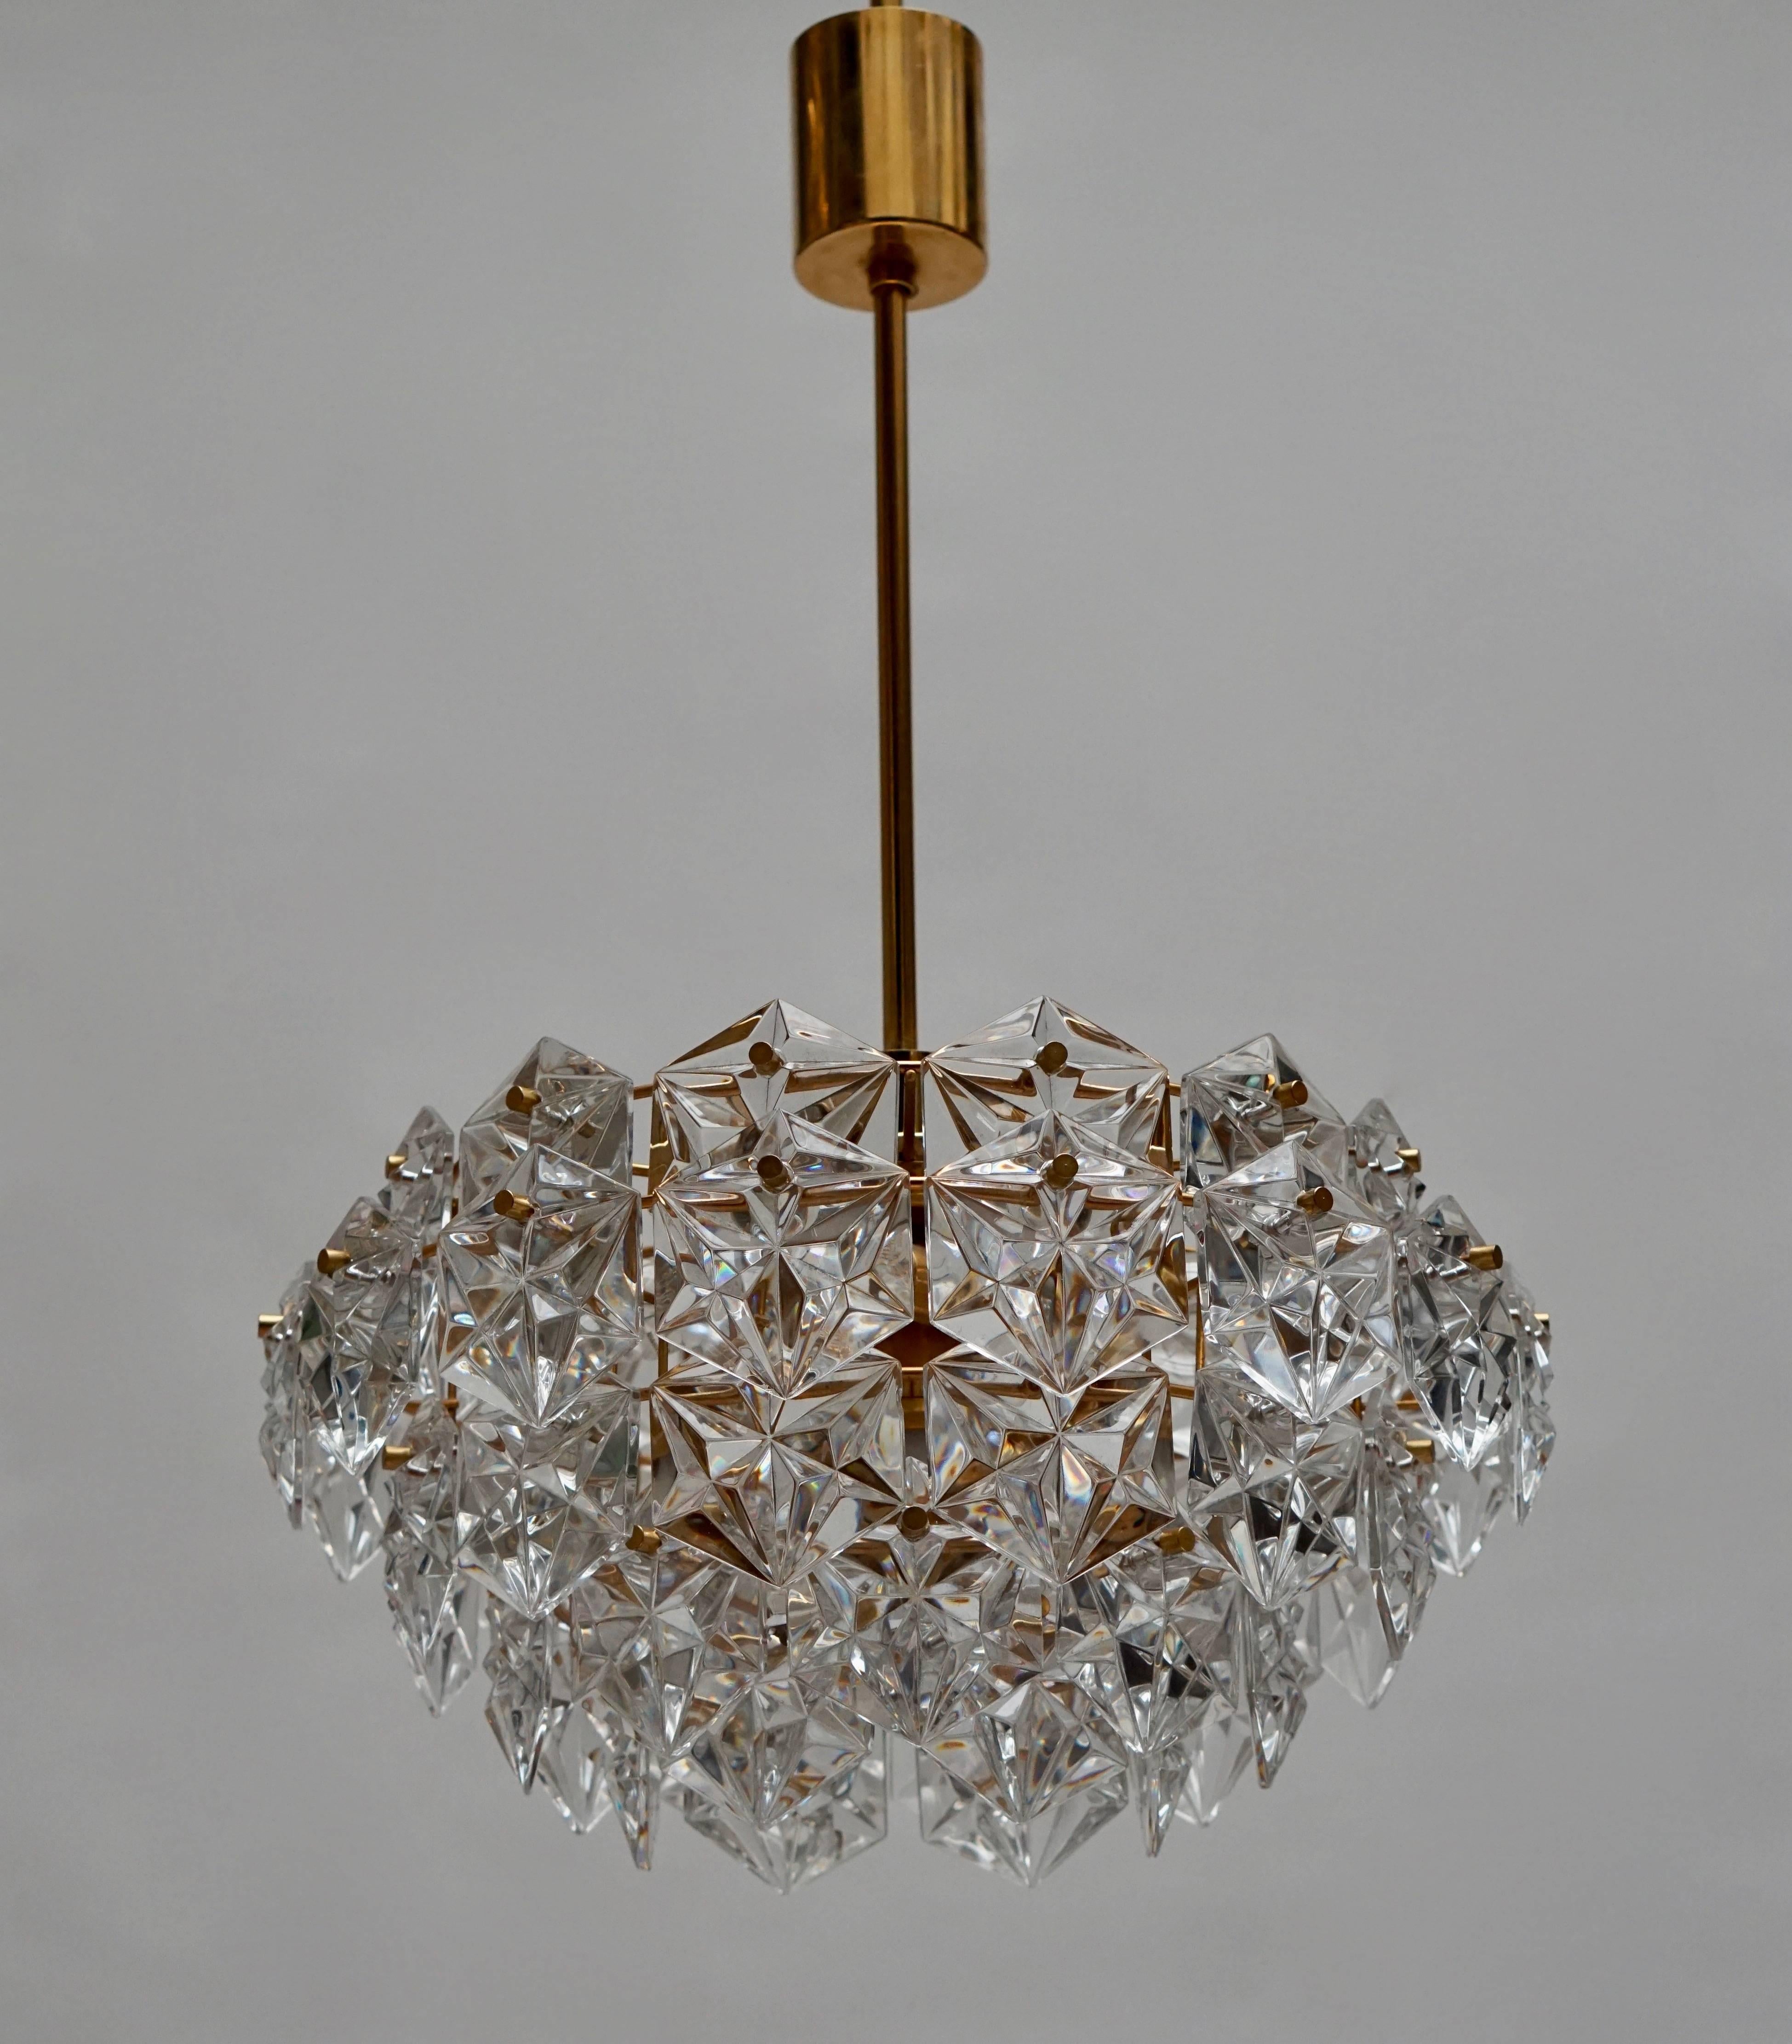 German Mid-Century Modern Chandelier, Gold-Plated with Molded-Crystals, Kinkeldey For Sale